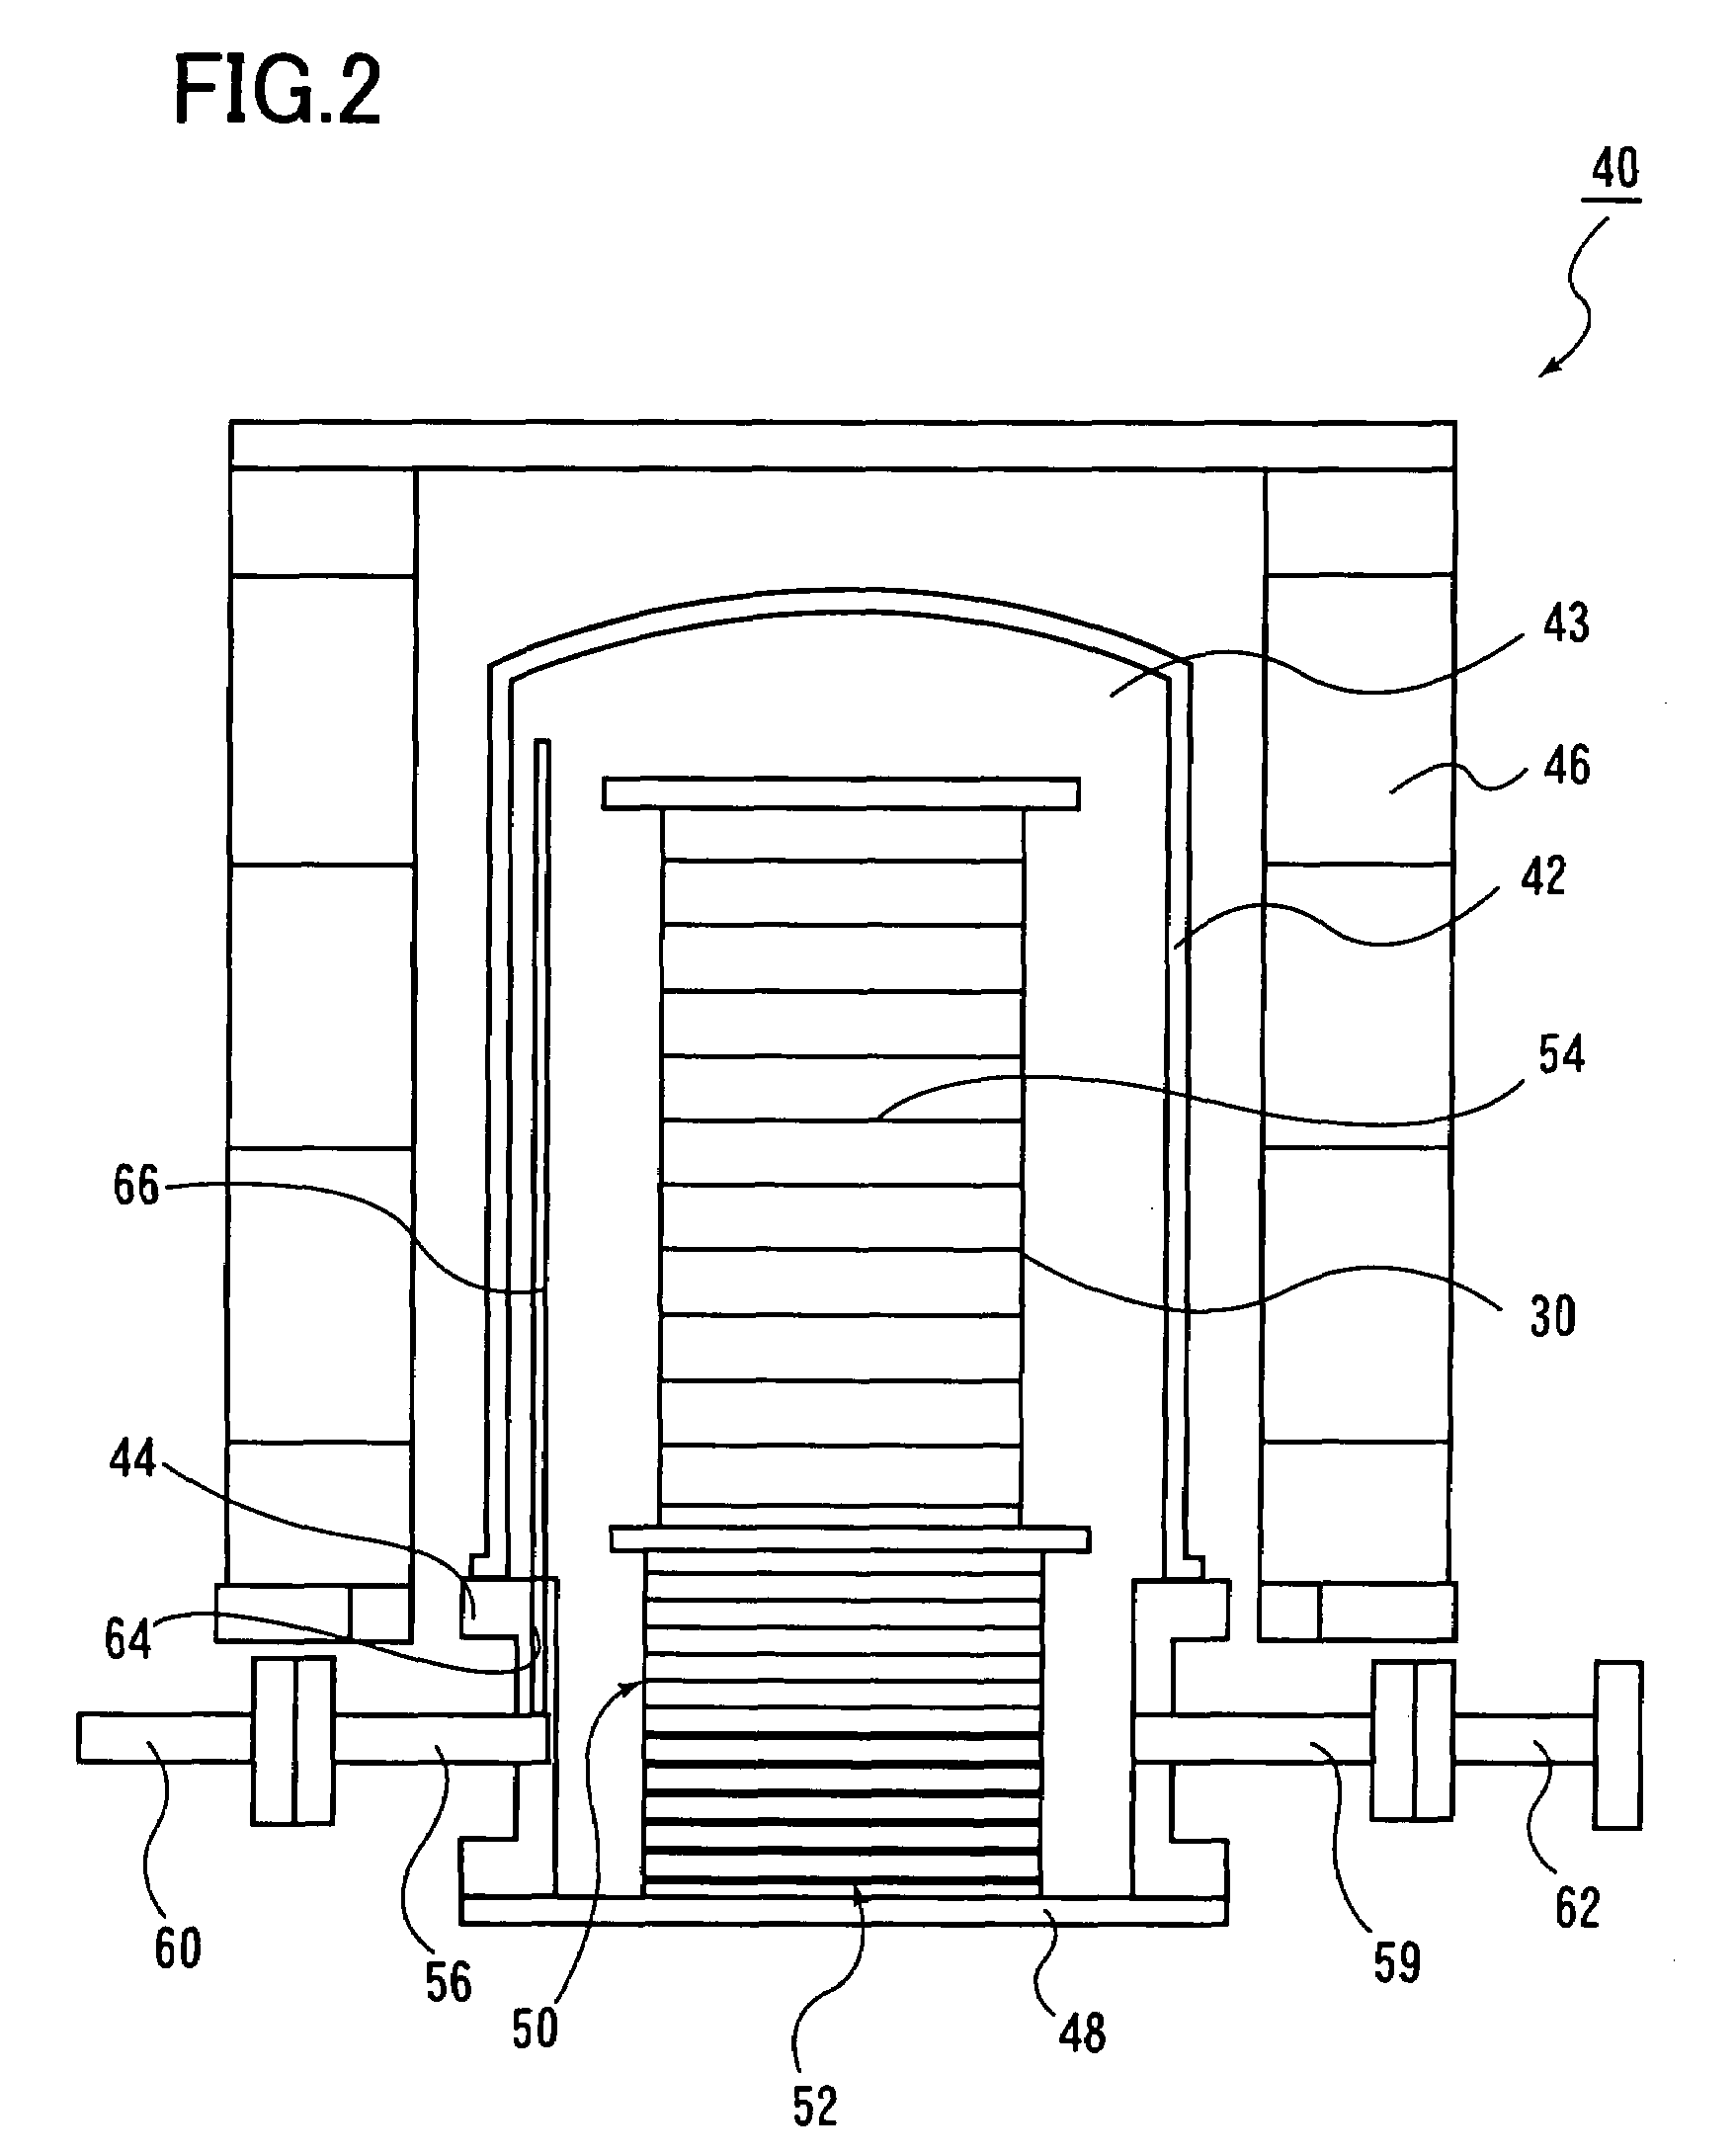 Heat treatment apparatus and method of manufacturing substrates